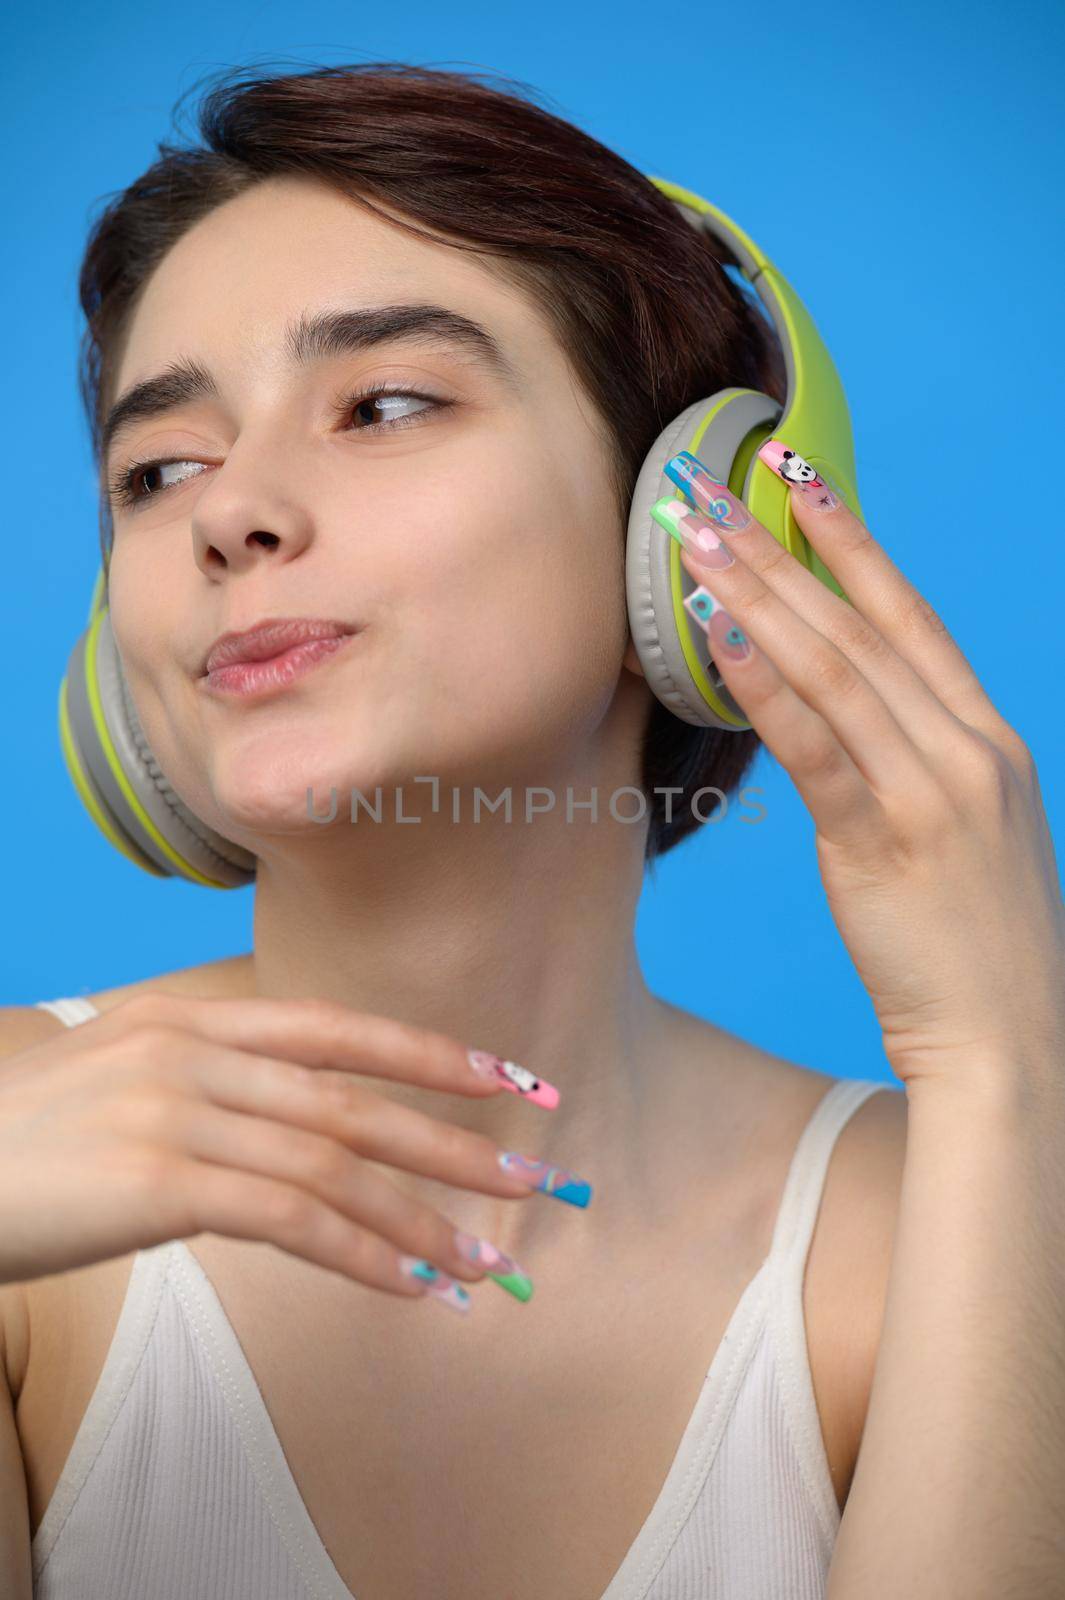 Portrait of cute young bare shoulders brunette with extravagant nail art listening to music using wireless headphones, studio shot